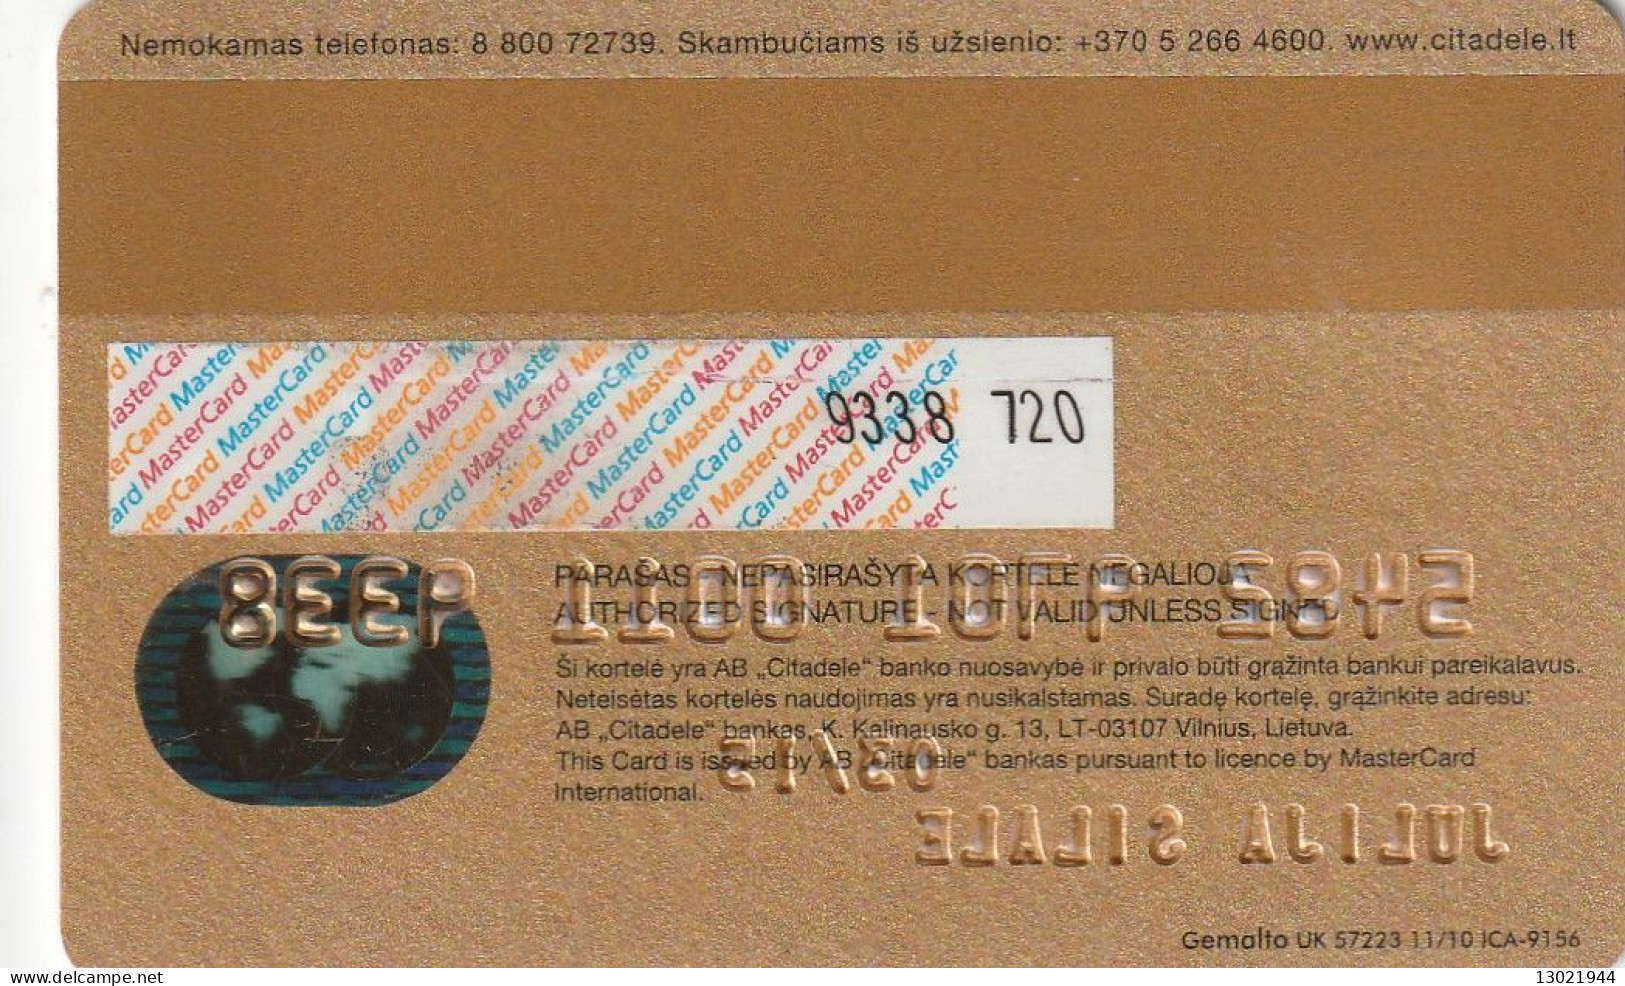 N. 2 LITUANIA BANK  CARDS  - POSSIBLE SALE OF SINGLE CARDS - Credit Cards (Exp. Date Min. 10 Years)